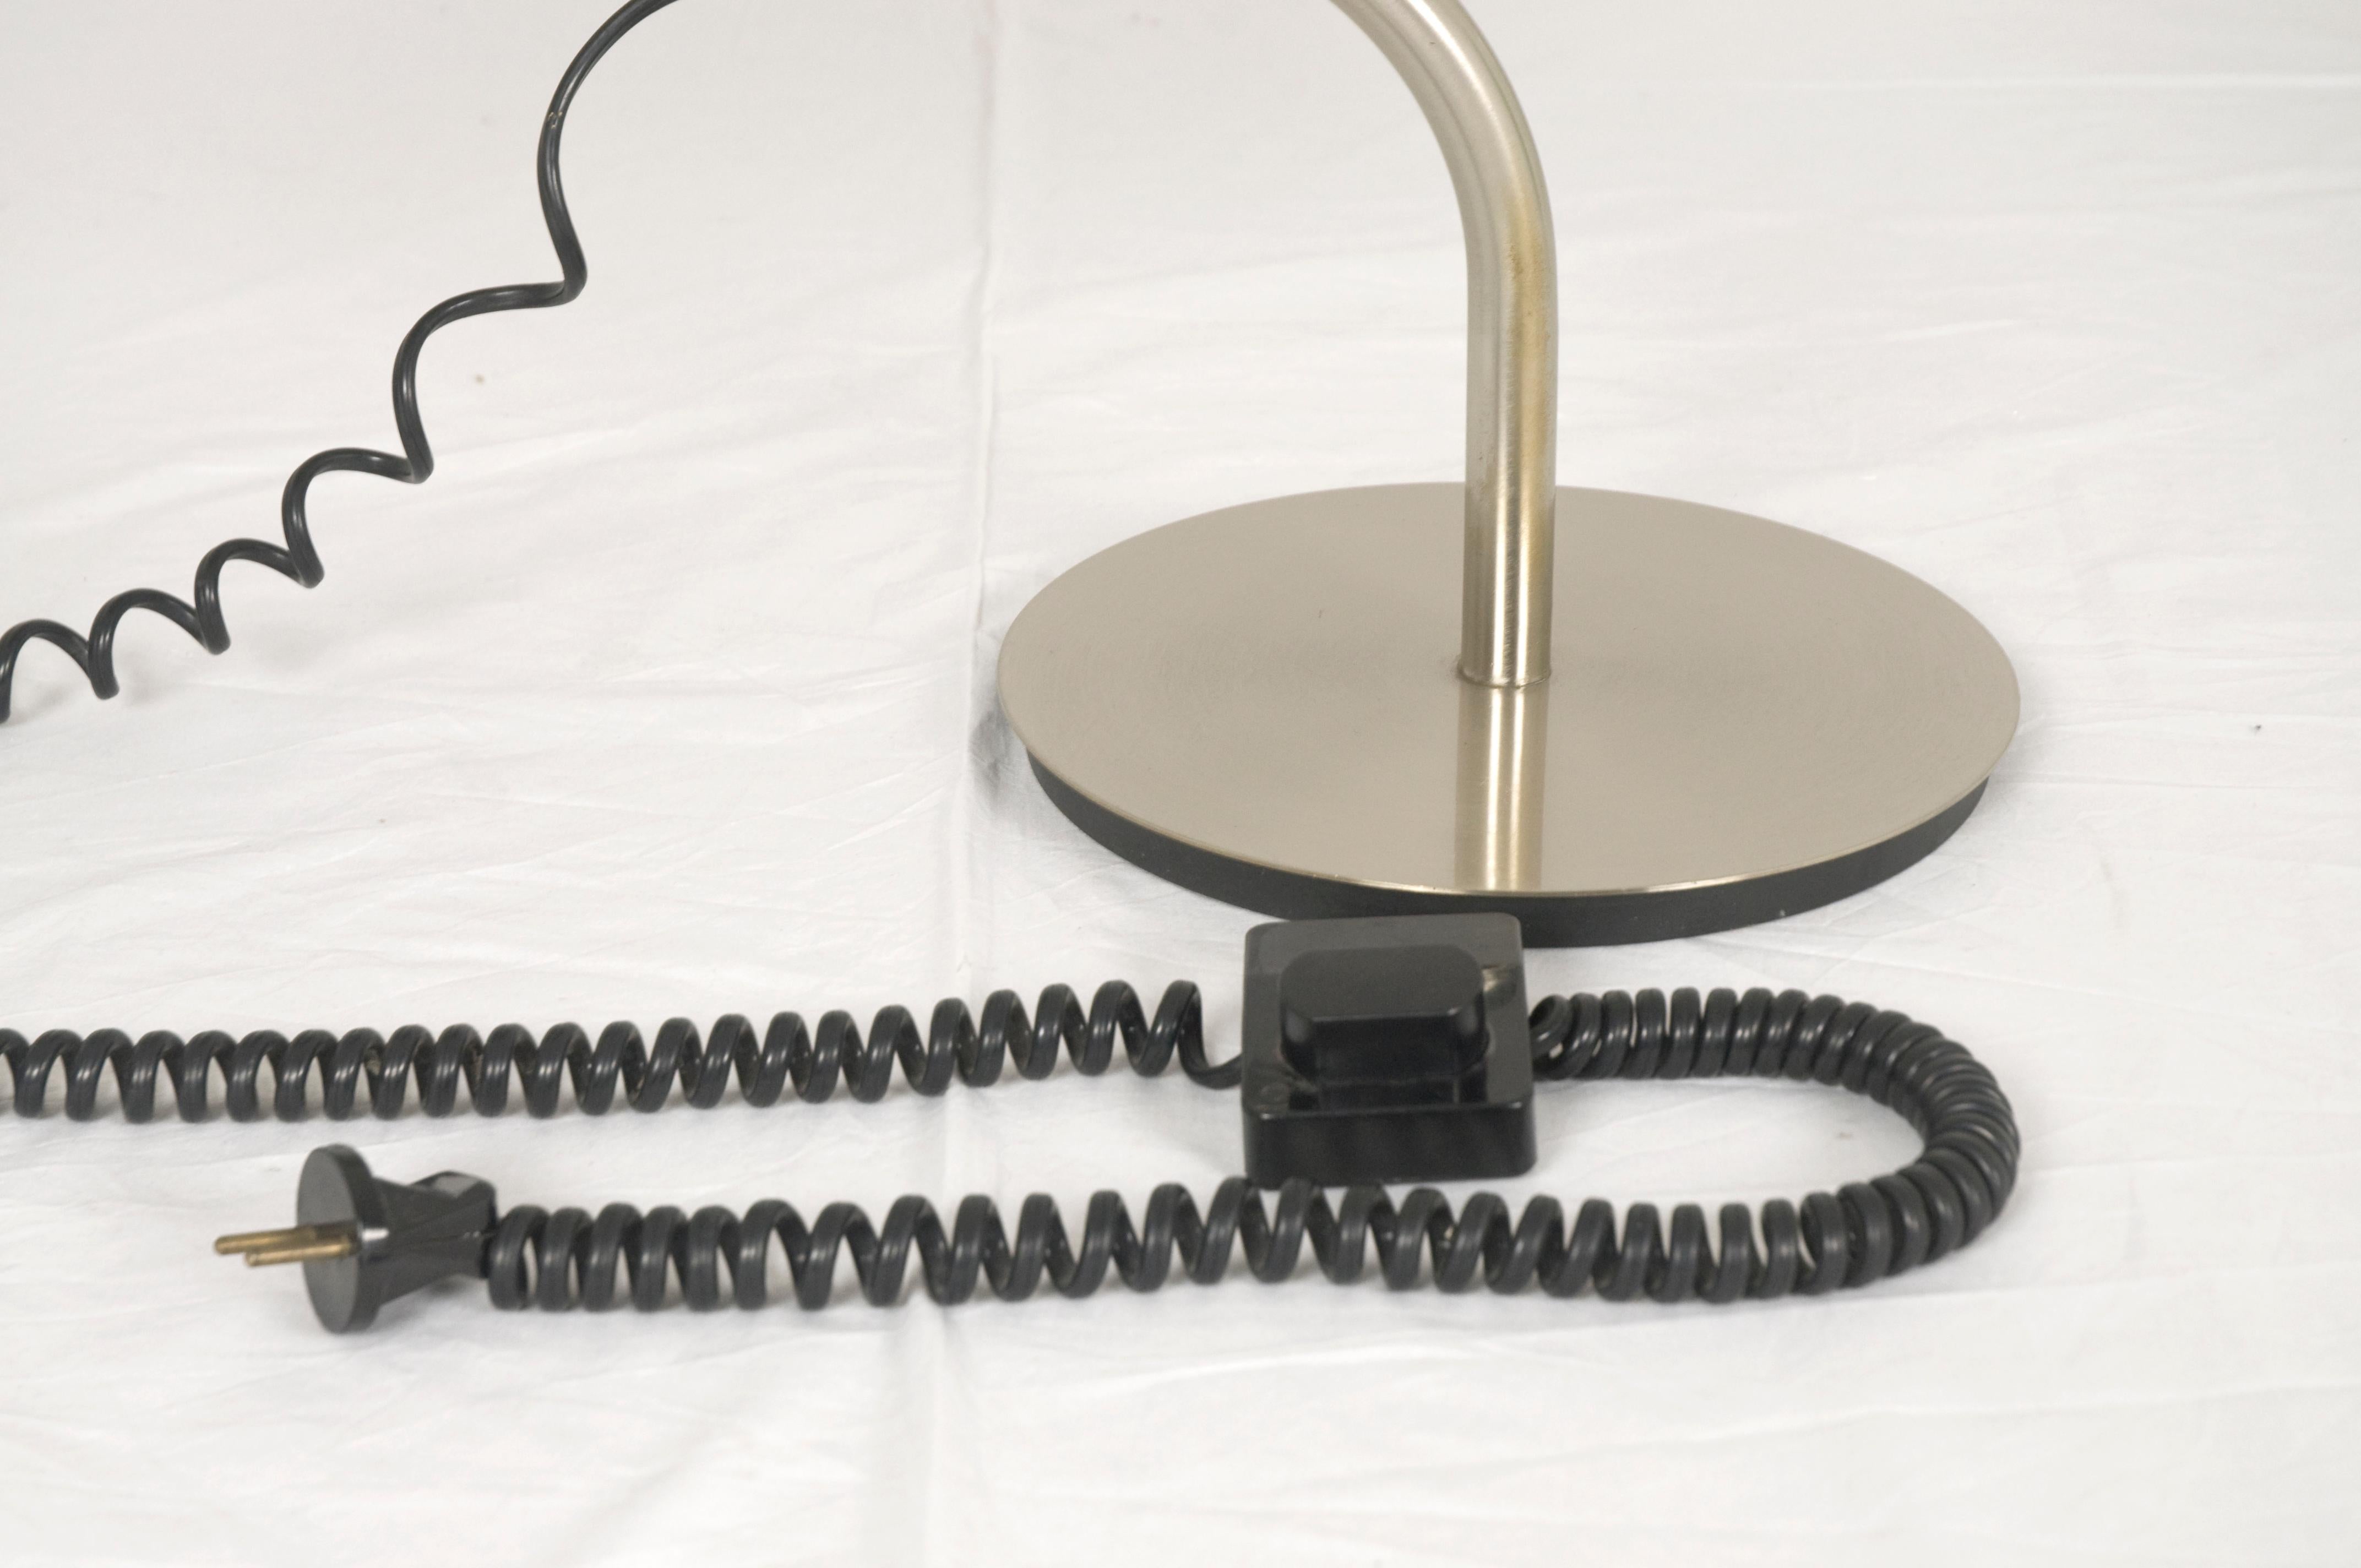 Plastic & Nickel Table Lamp Professional by G. Scolari for Valenti, 1970 In Good Condition For Sale In Varese, Lombardia